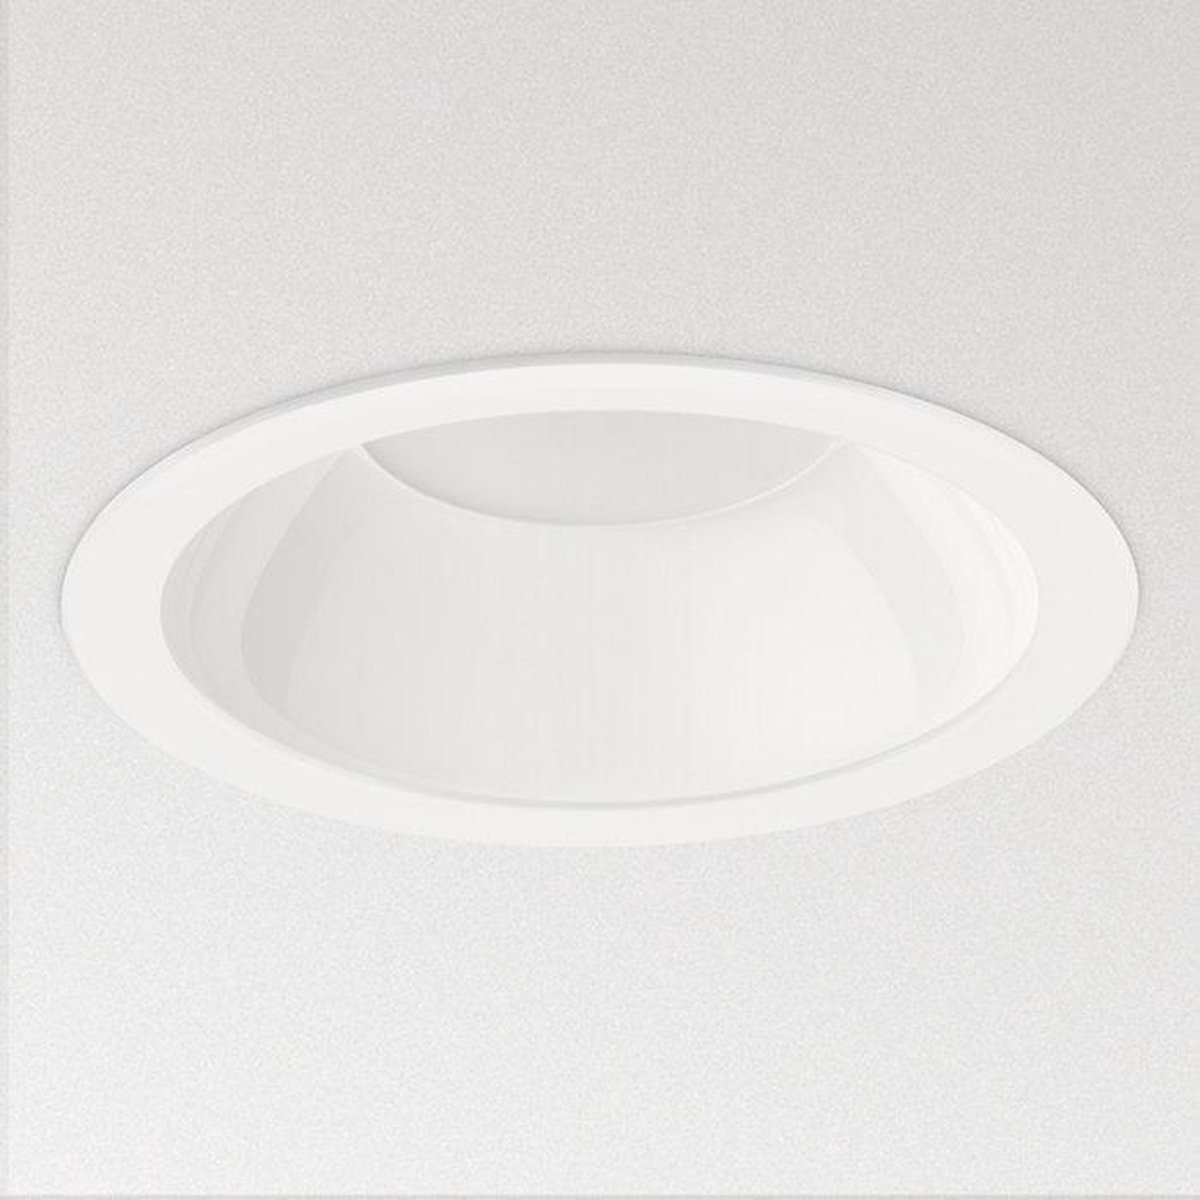 Philips LED Downlight Coreline DN140B 9.5W 1100lm 120D - 840 Koel Wit | 162mm - IP54 - Wit Reflector